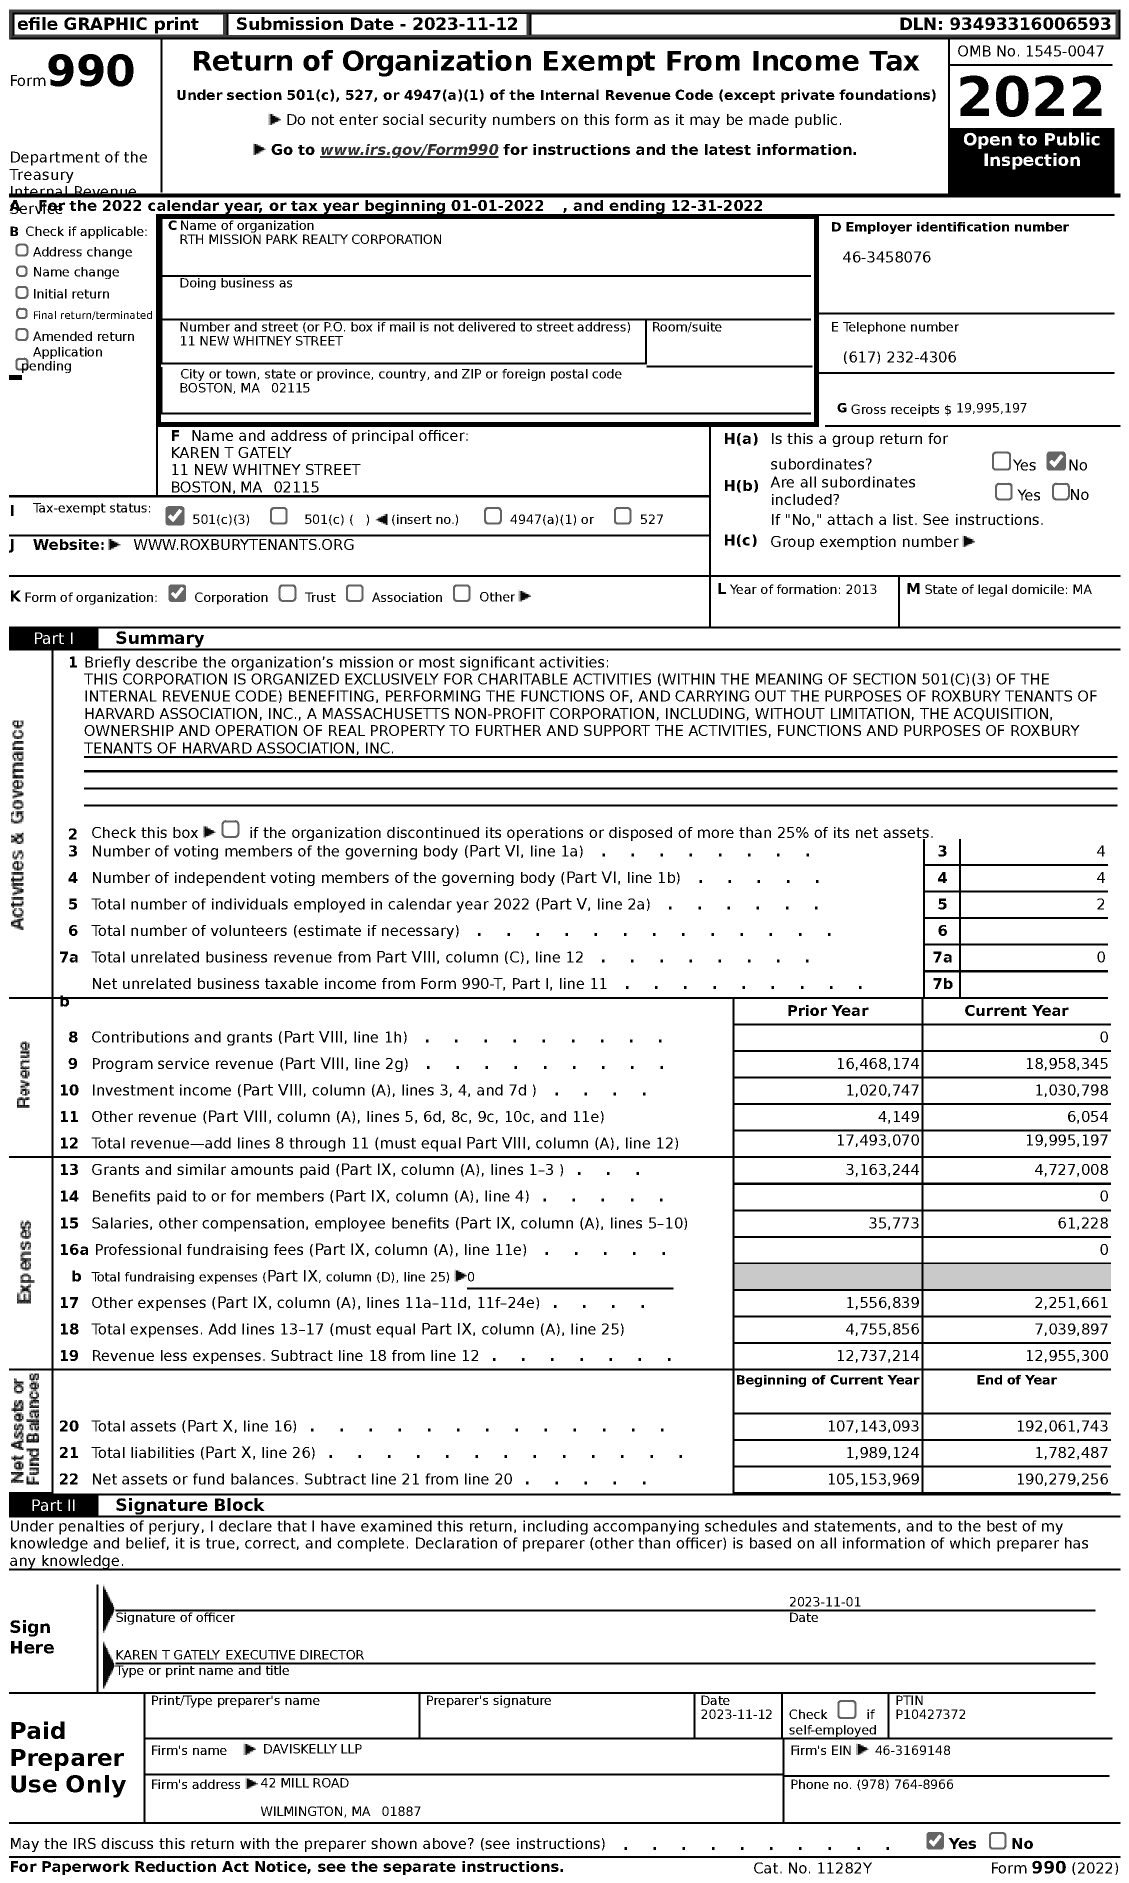 Image of first page of 2022 Form 990 for RTH Mission Park Realty Corporation